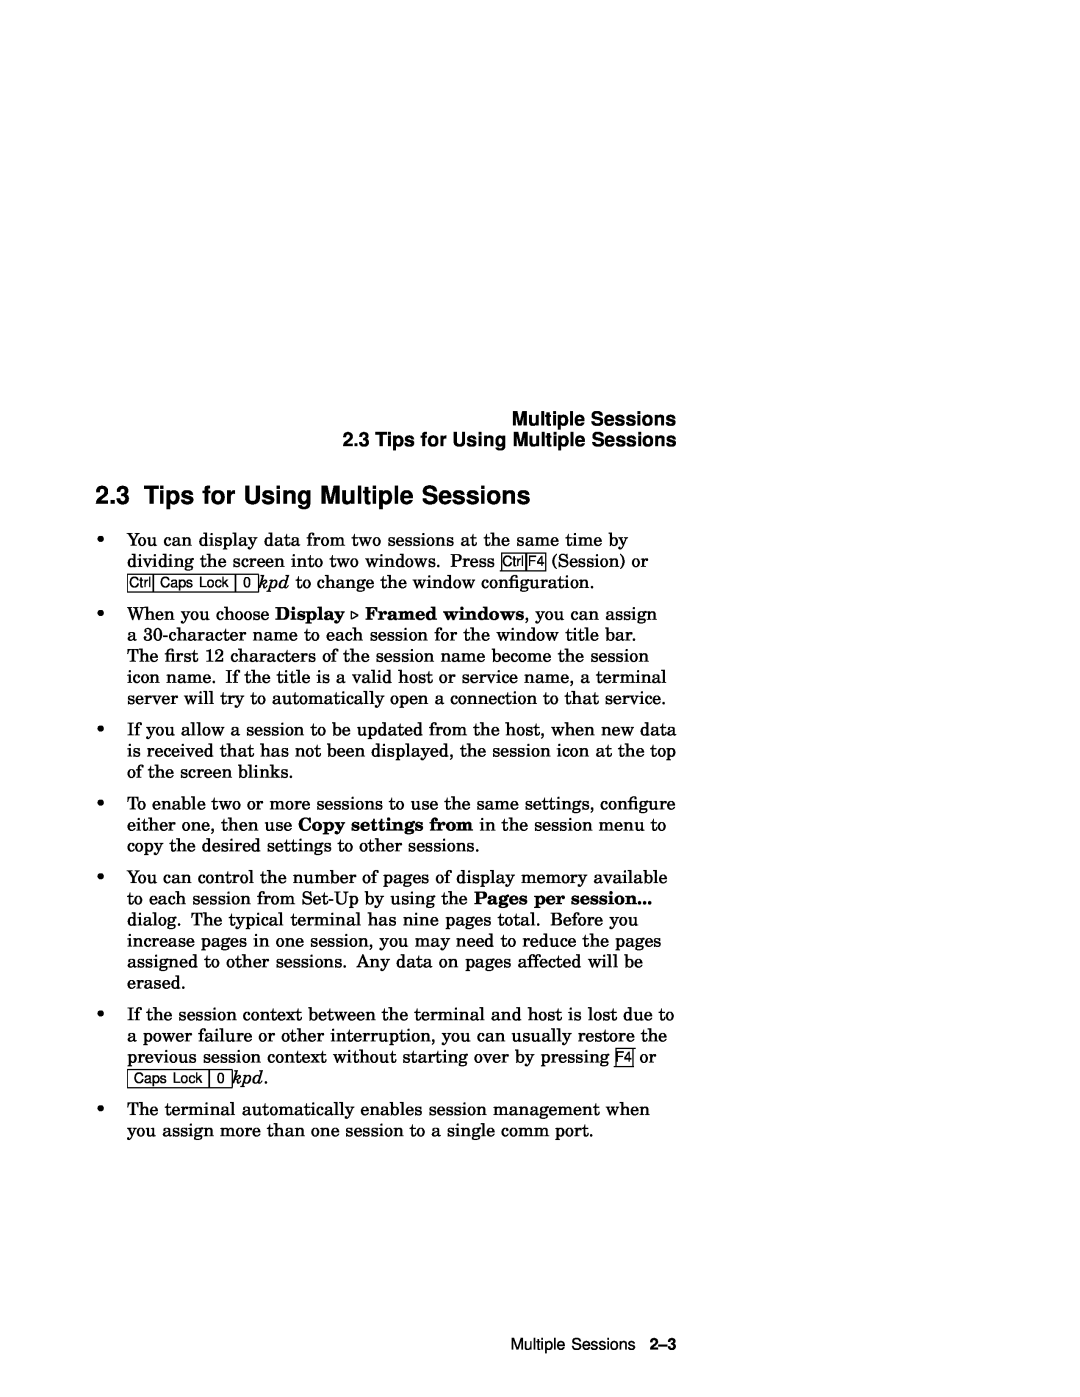 IBM WS525 manual Multiple Sessions 2.3 Tips for Using Multiple Sessions 